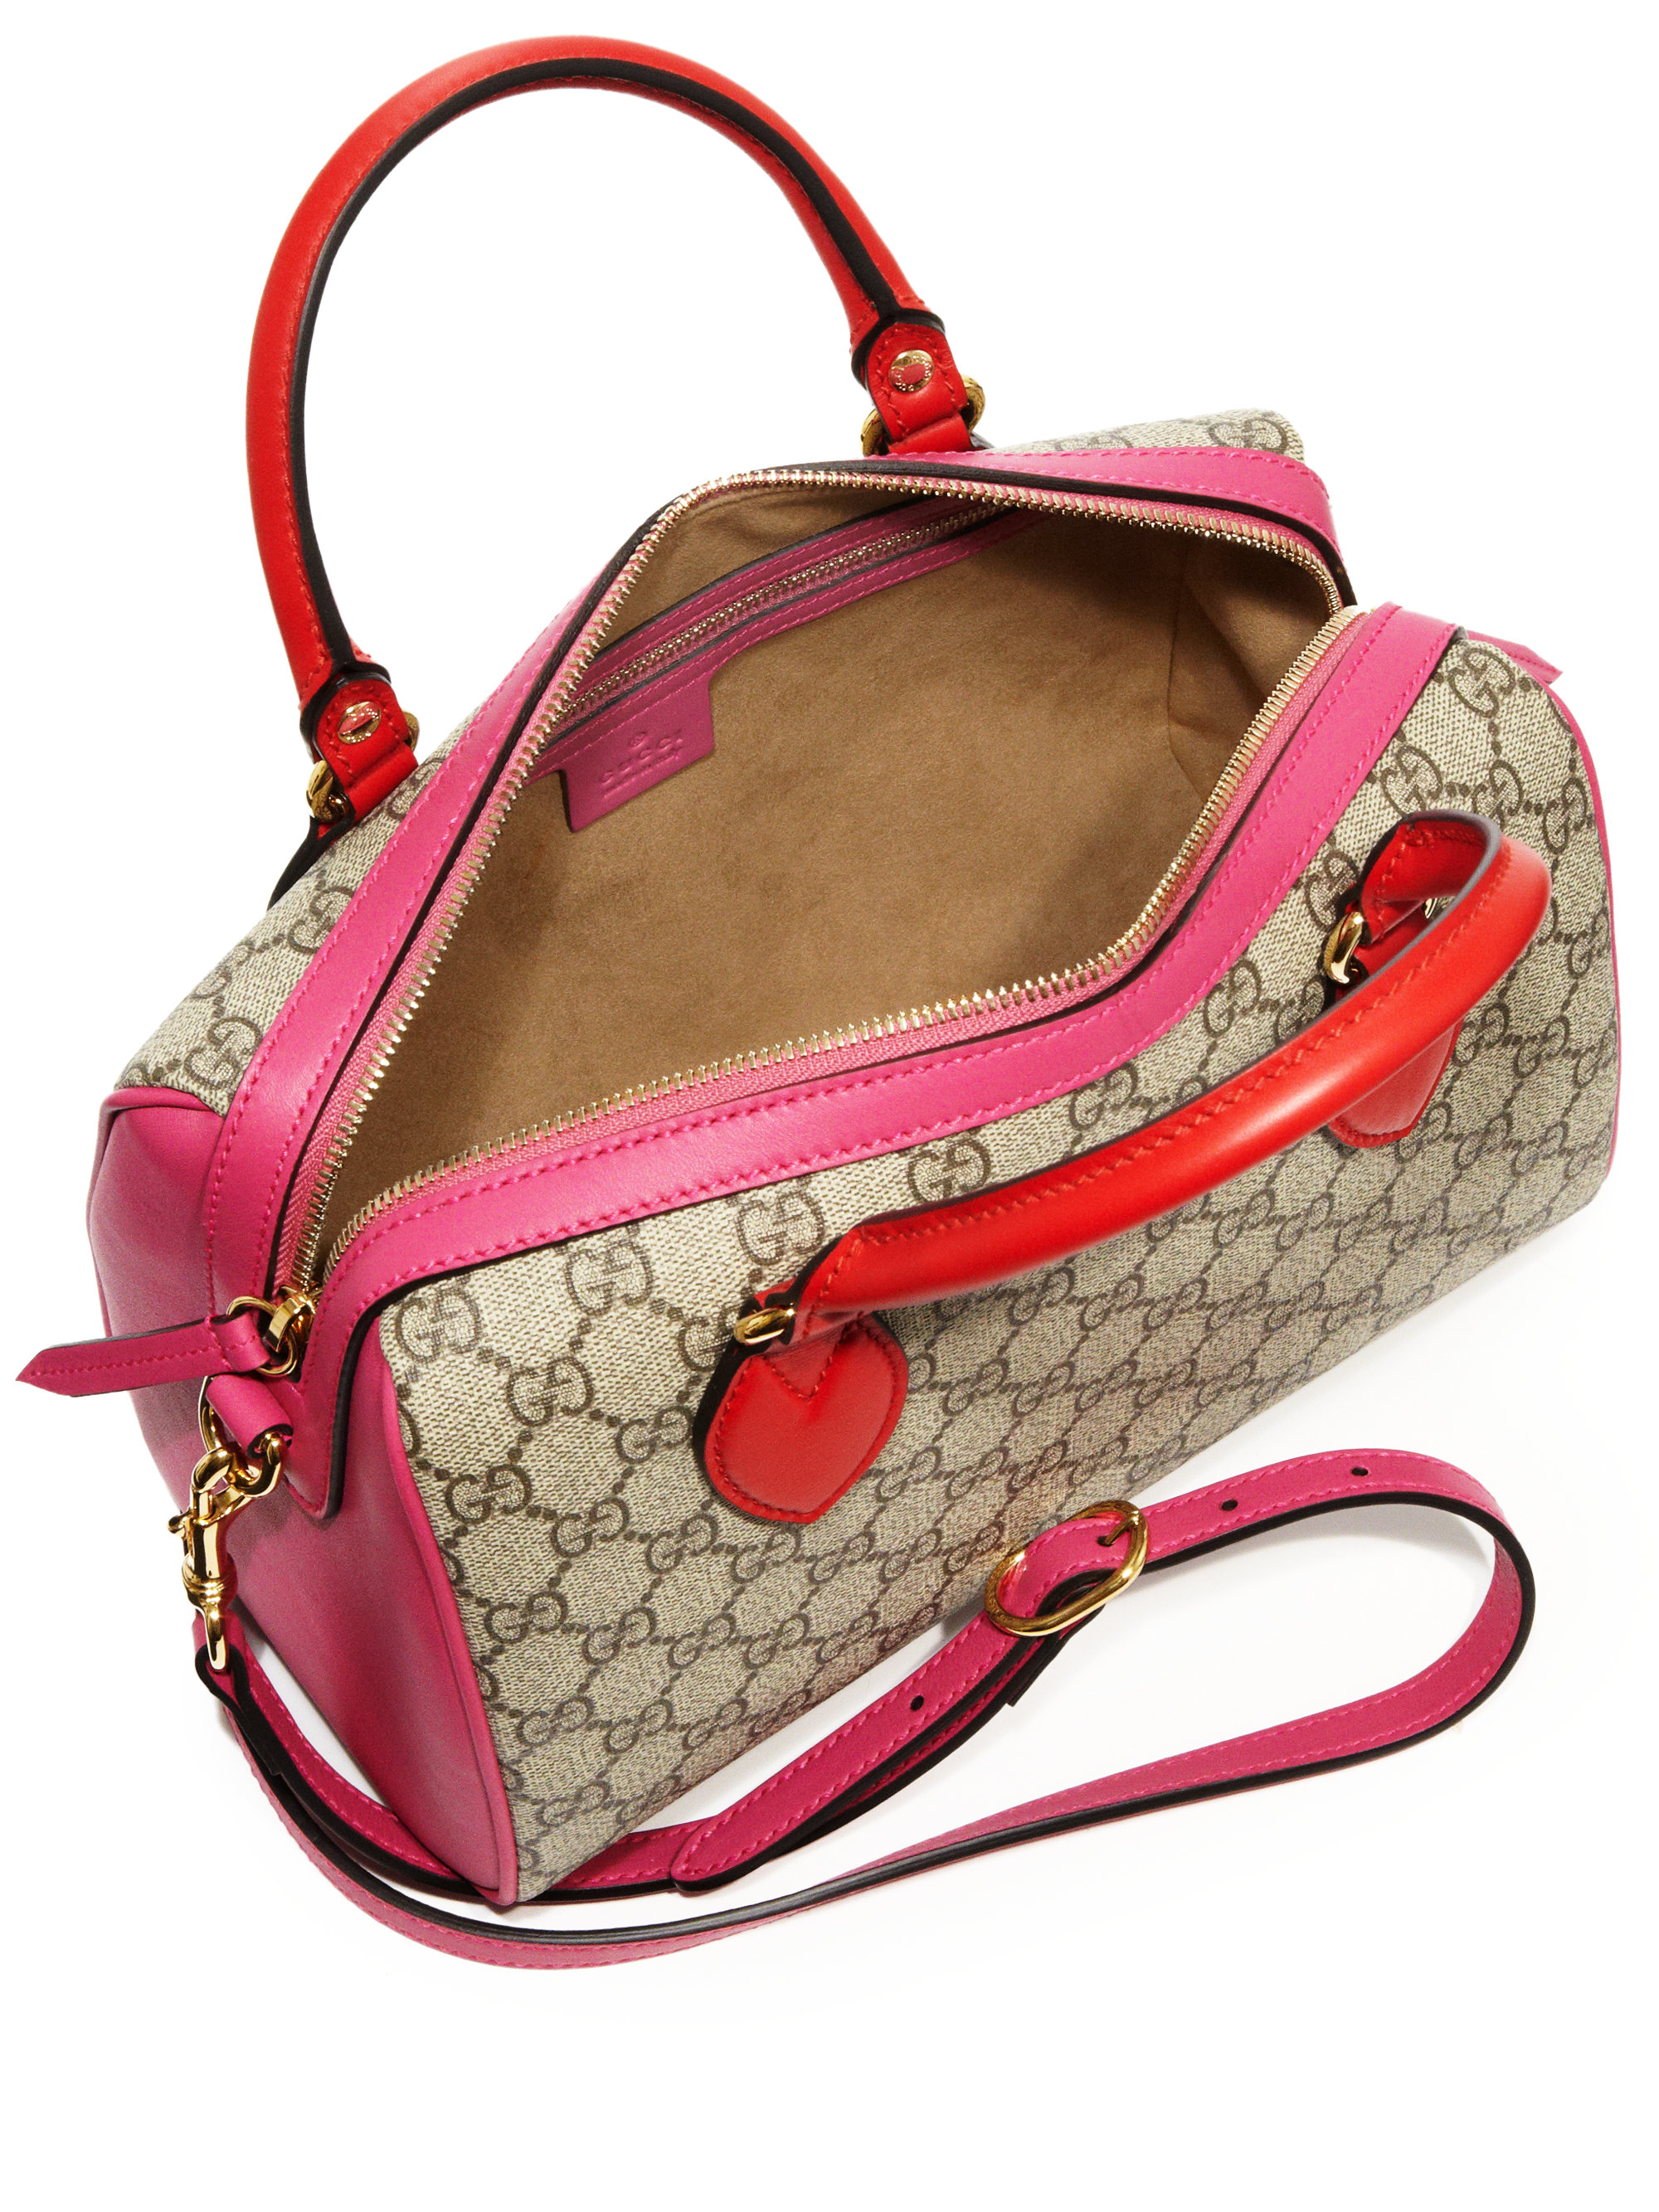 Gucci Leather Gg Supreme Small Top-handle Bag in Beige-Pink (Pink) - Lyst